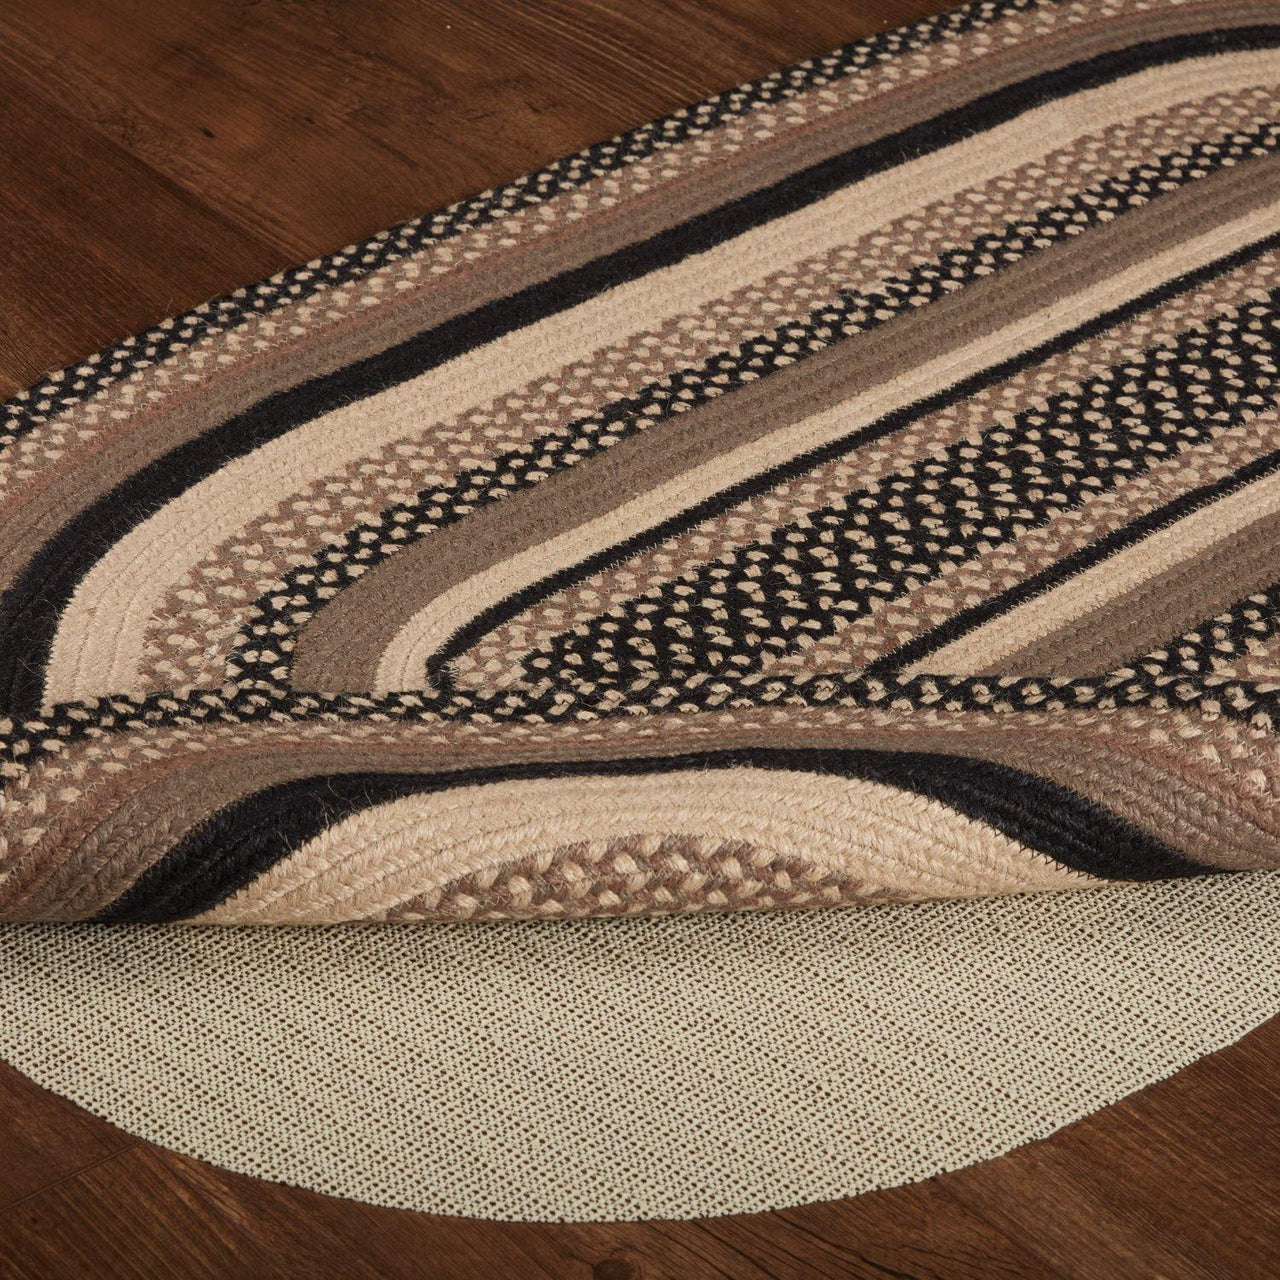 Sawyer Mill Charcoal Jute Braided Rug Oval 27"x48" with Rug Pad VHC Brands - The Fox Decor